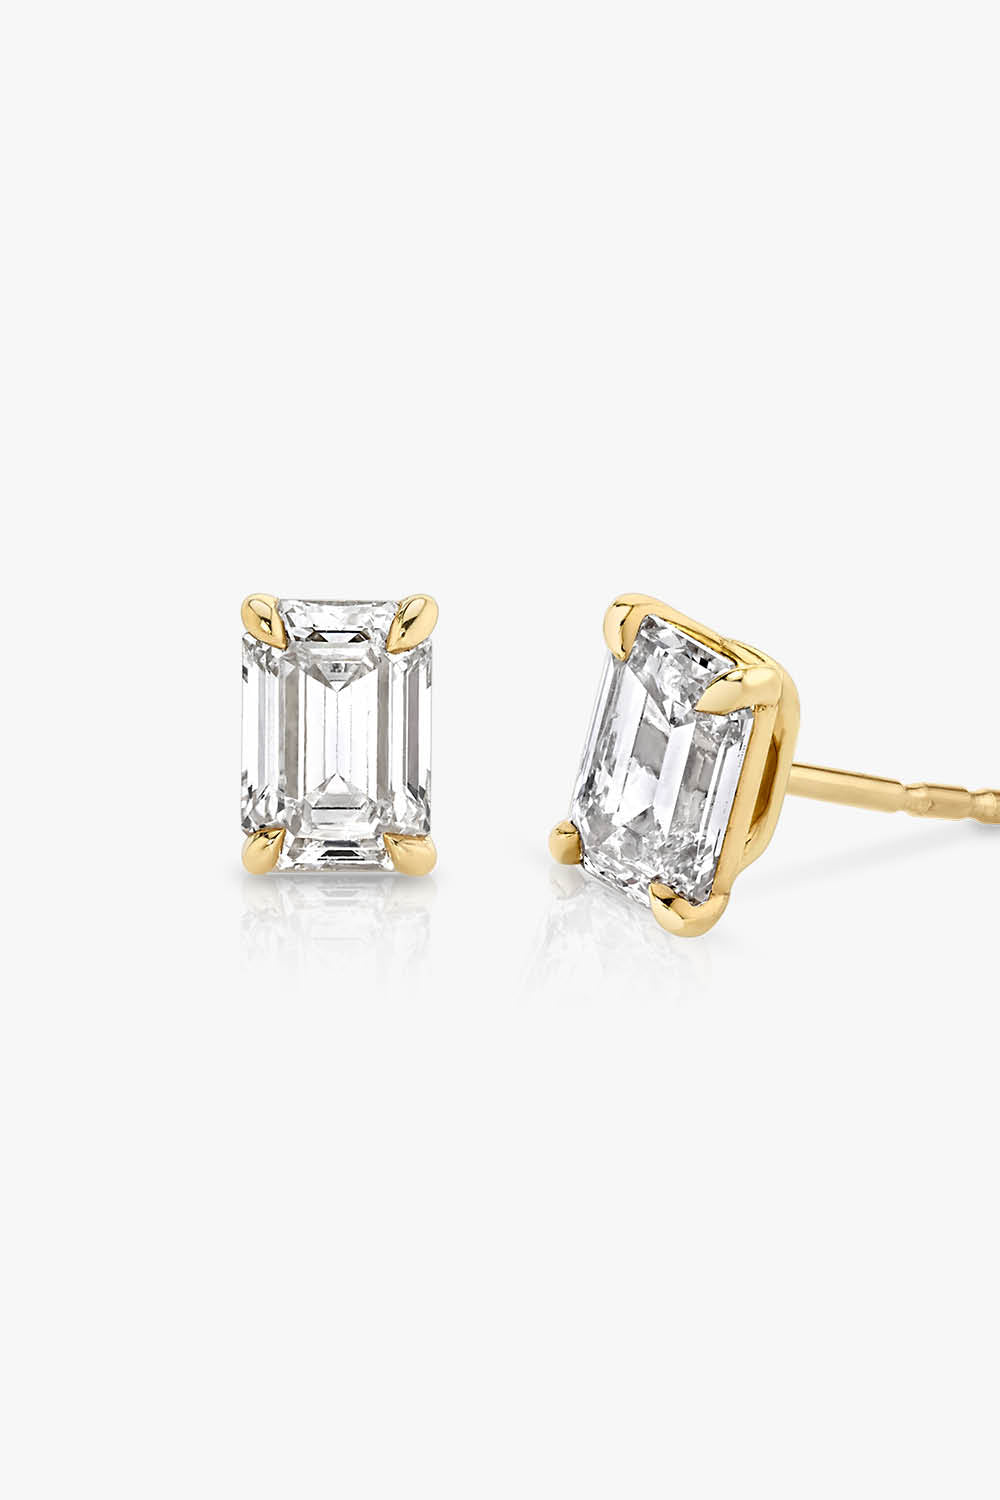 VRAI Solitaire Emerald Studs in Yellow Gold